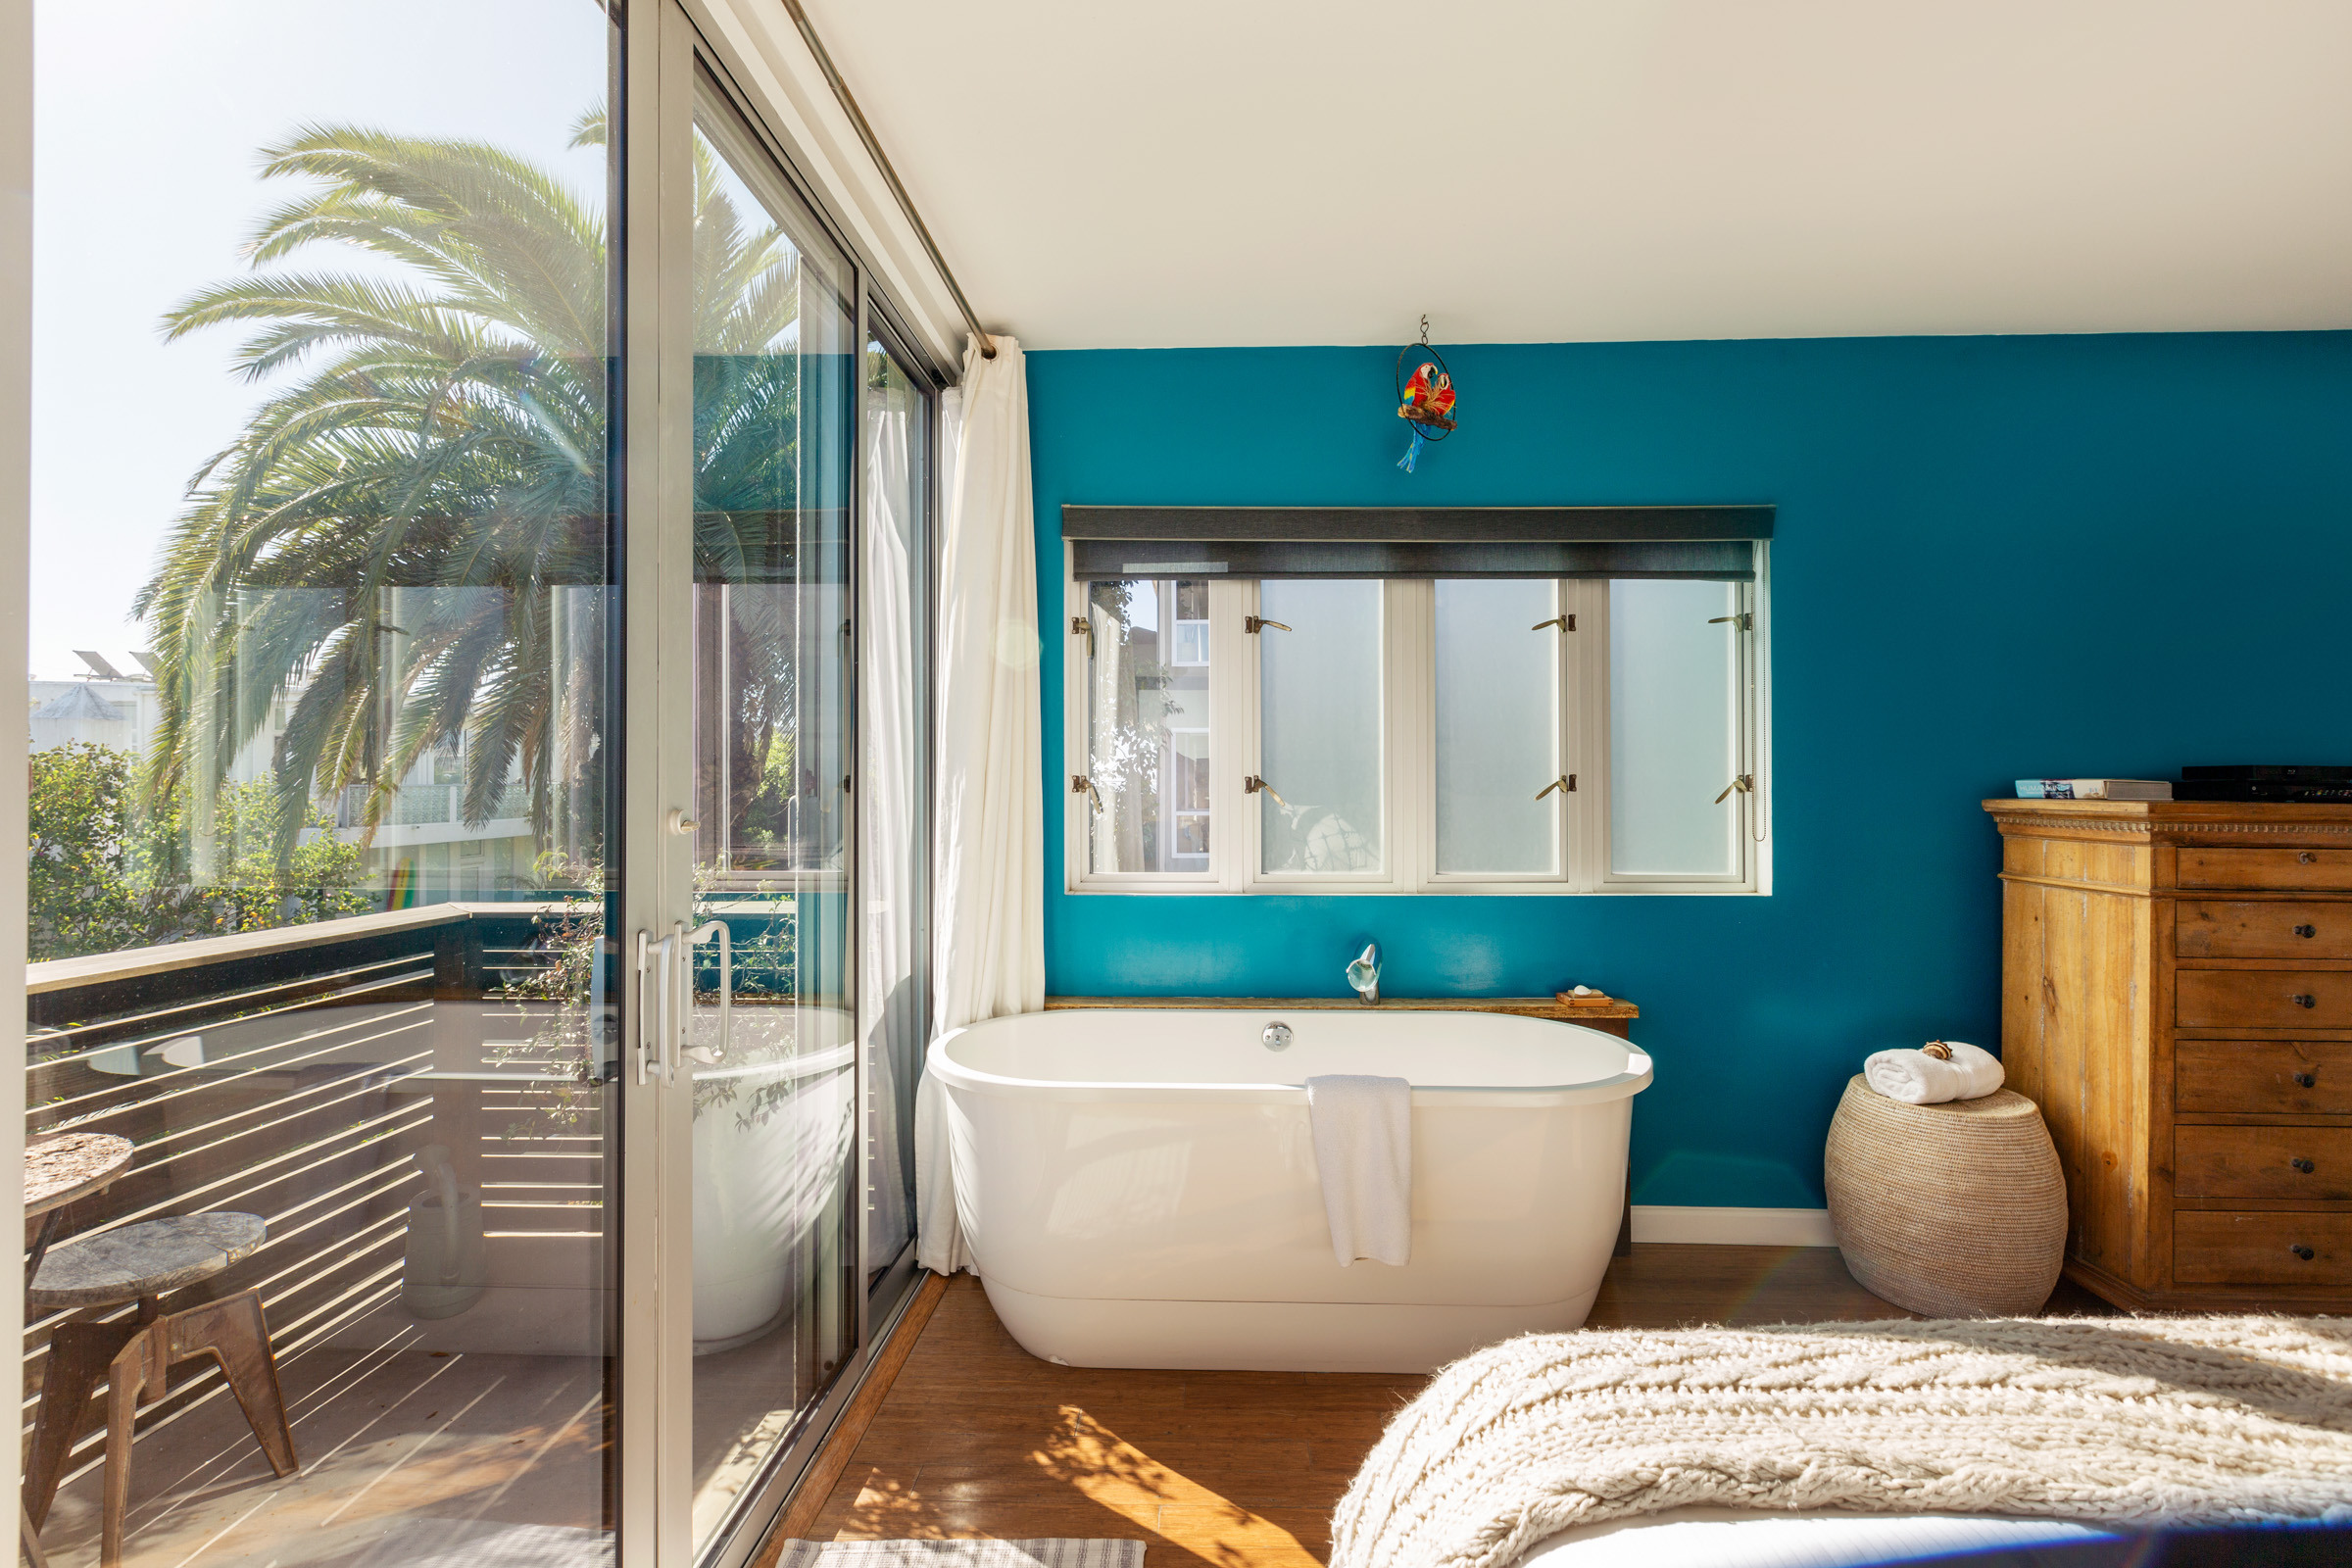 Blue painted bedroom with a bathtub against the wall with a view of palm trees and sliding glass door that leads to a balcony alongside the bedroom.